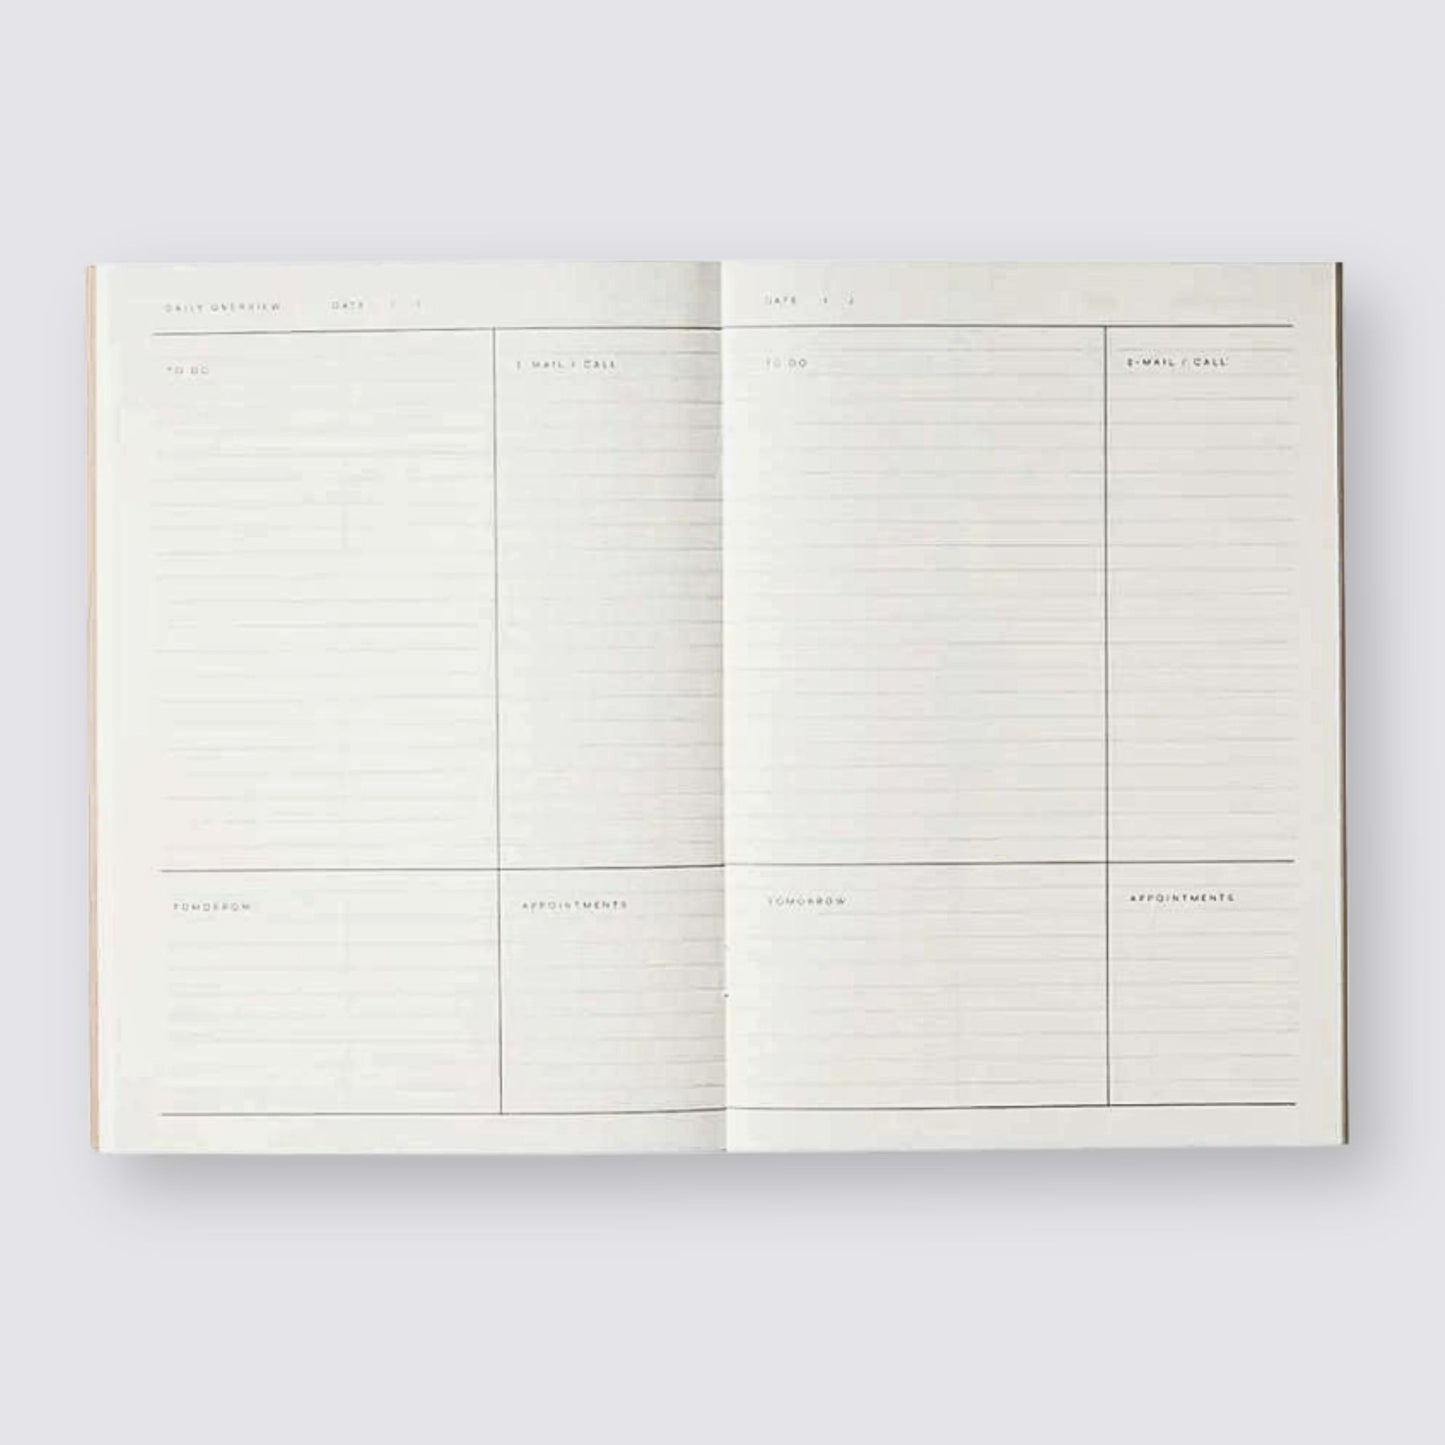 Daily Undated Planner